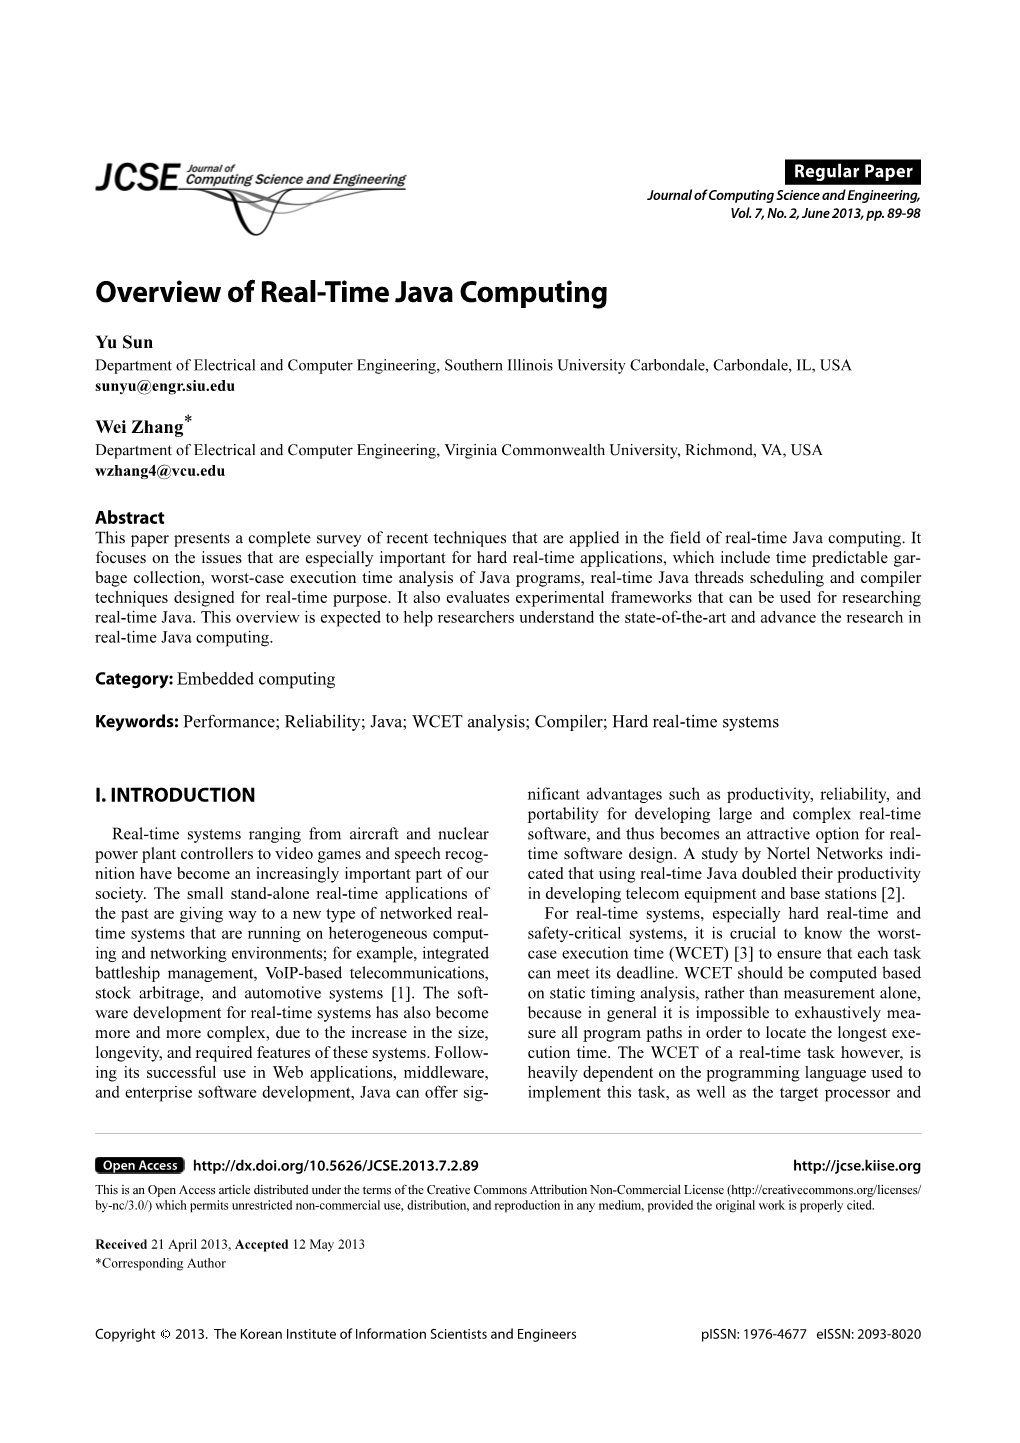 Overview of Real-Time Java Computing